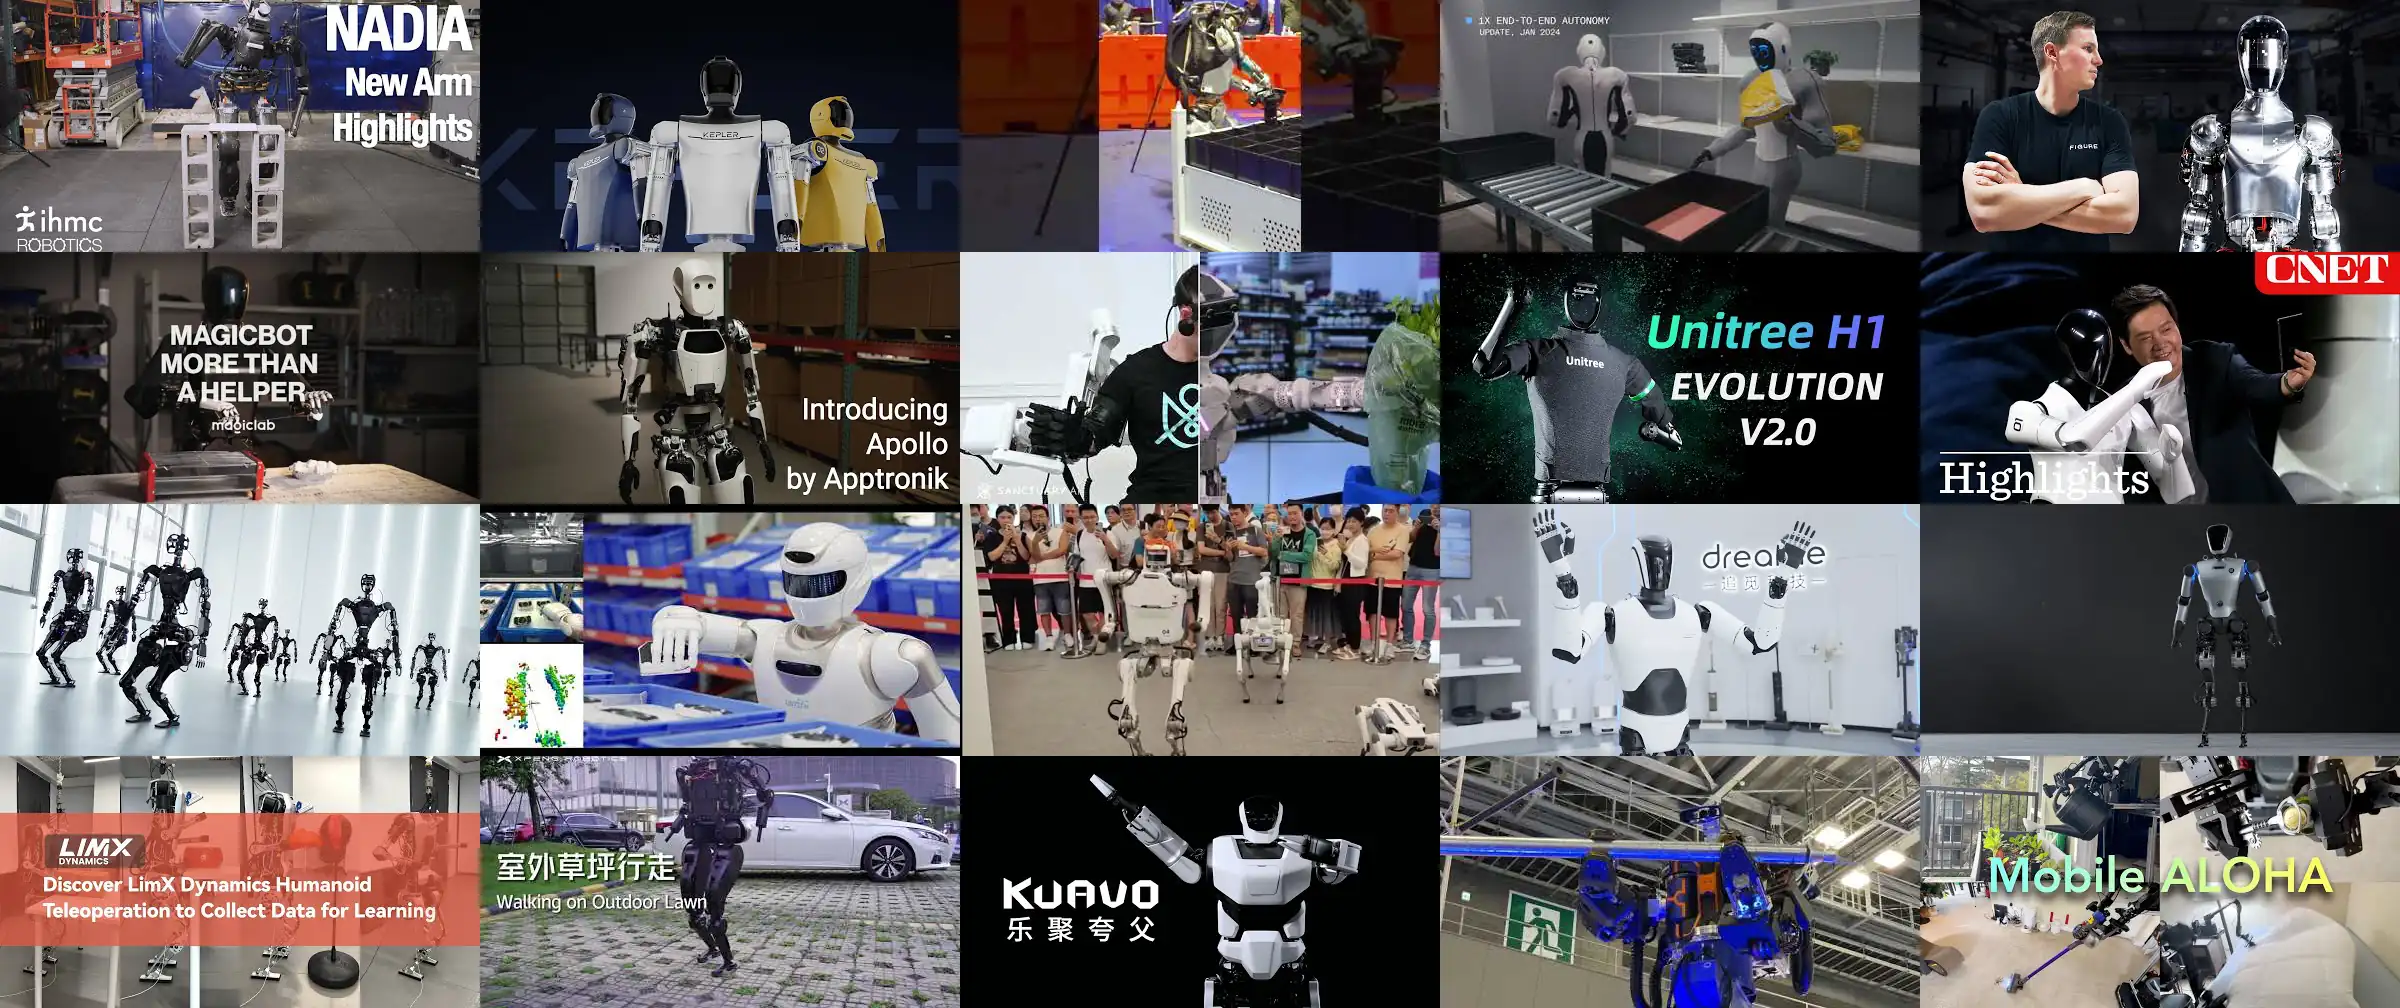 It really is a race now. In the past few months and even in just the past few days new videos of impressive humanoid robots are appearing at an accele